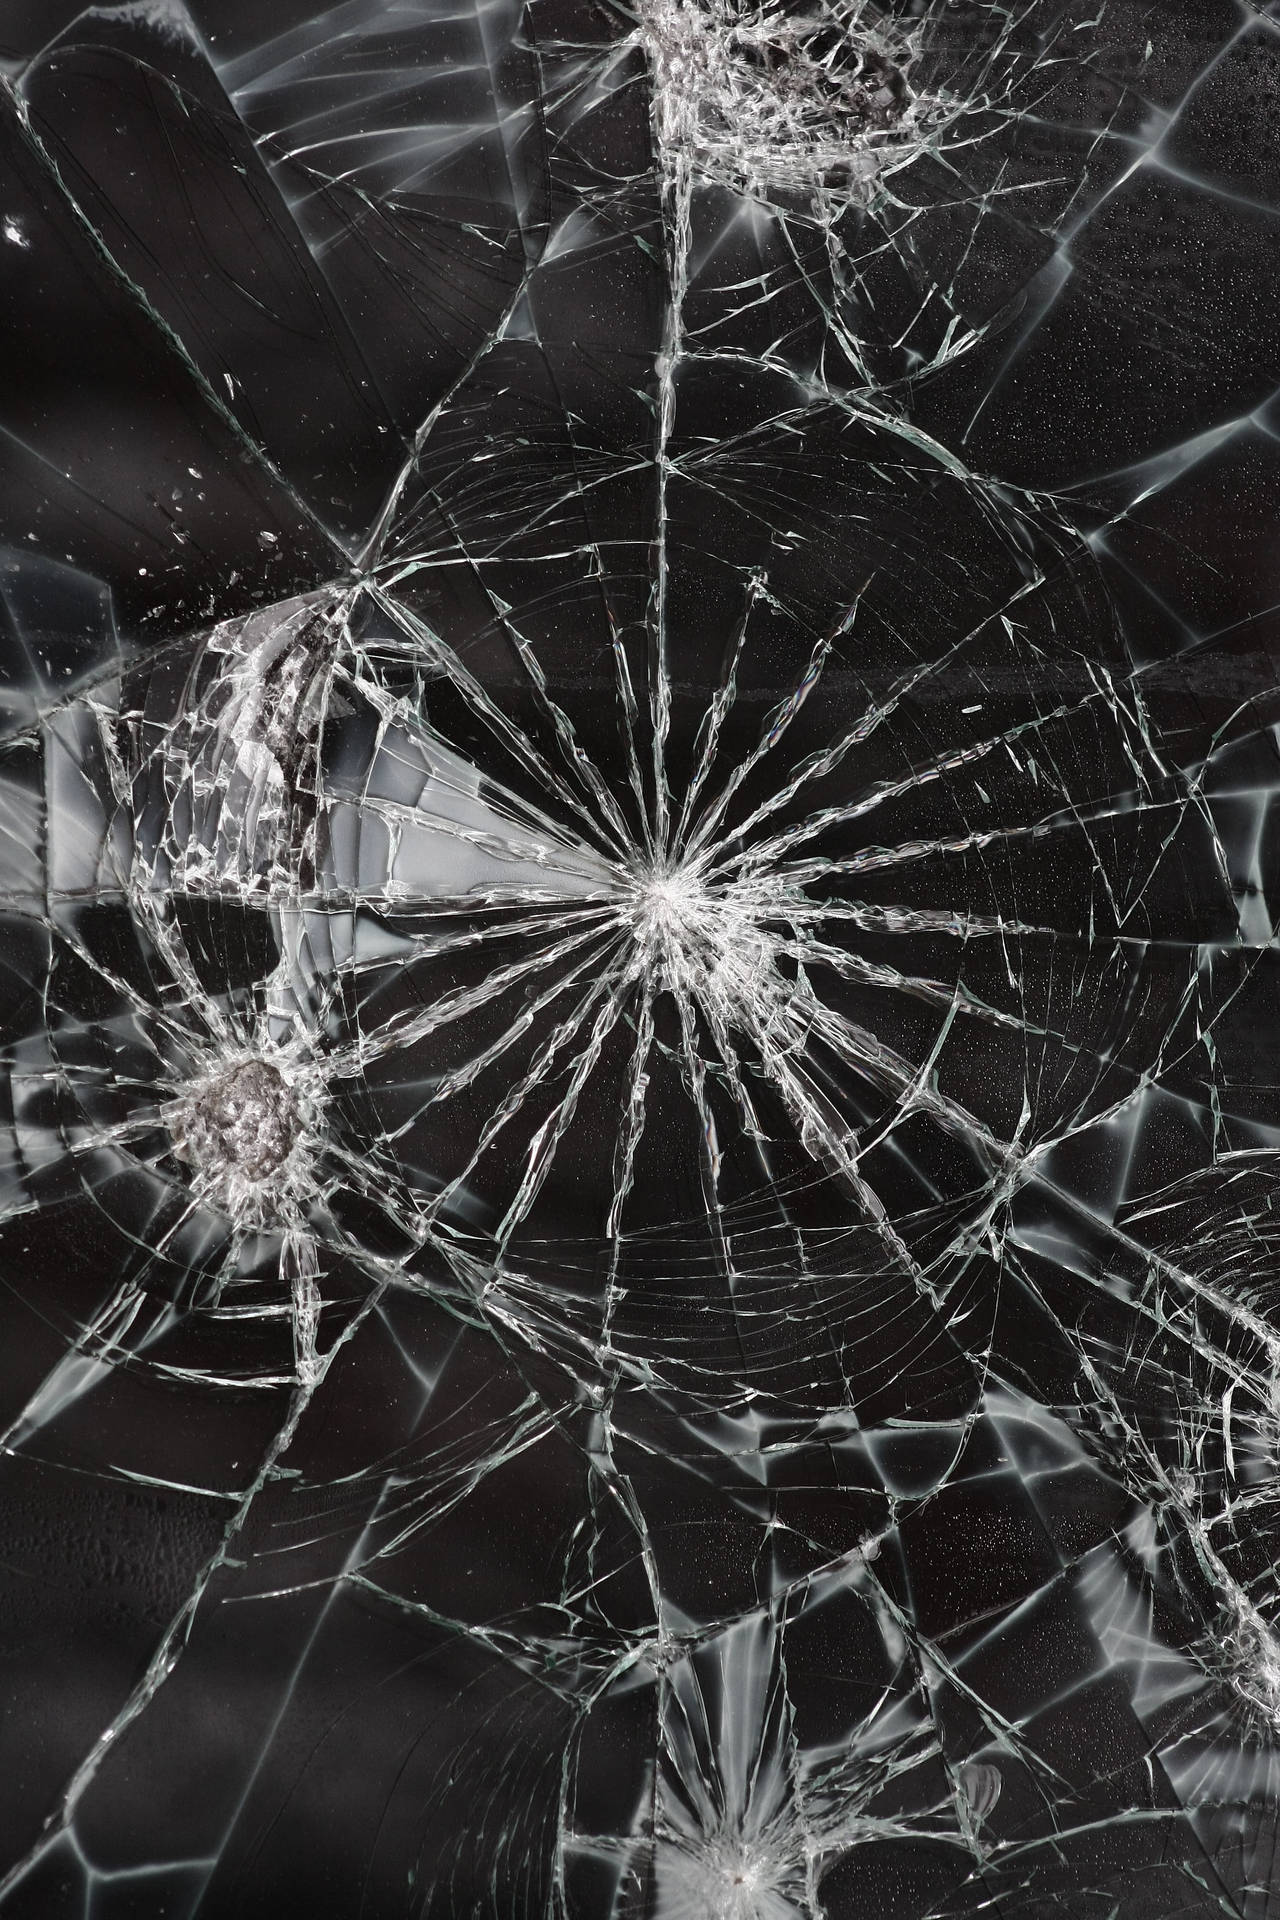 Shattered Illusions: A Broken Glass Close-up